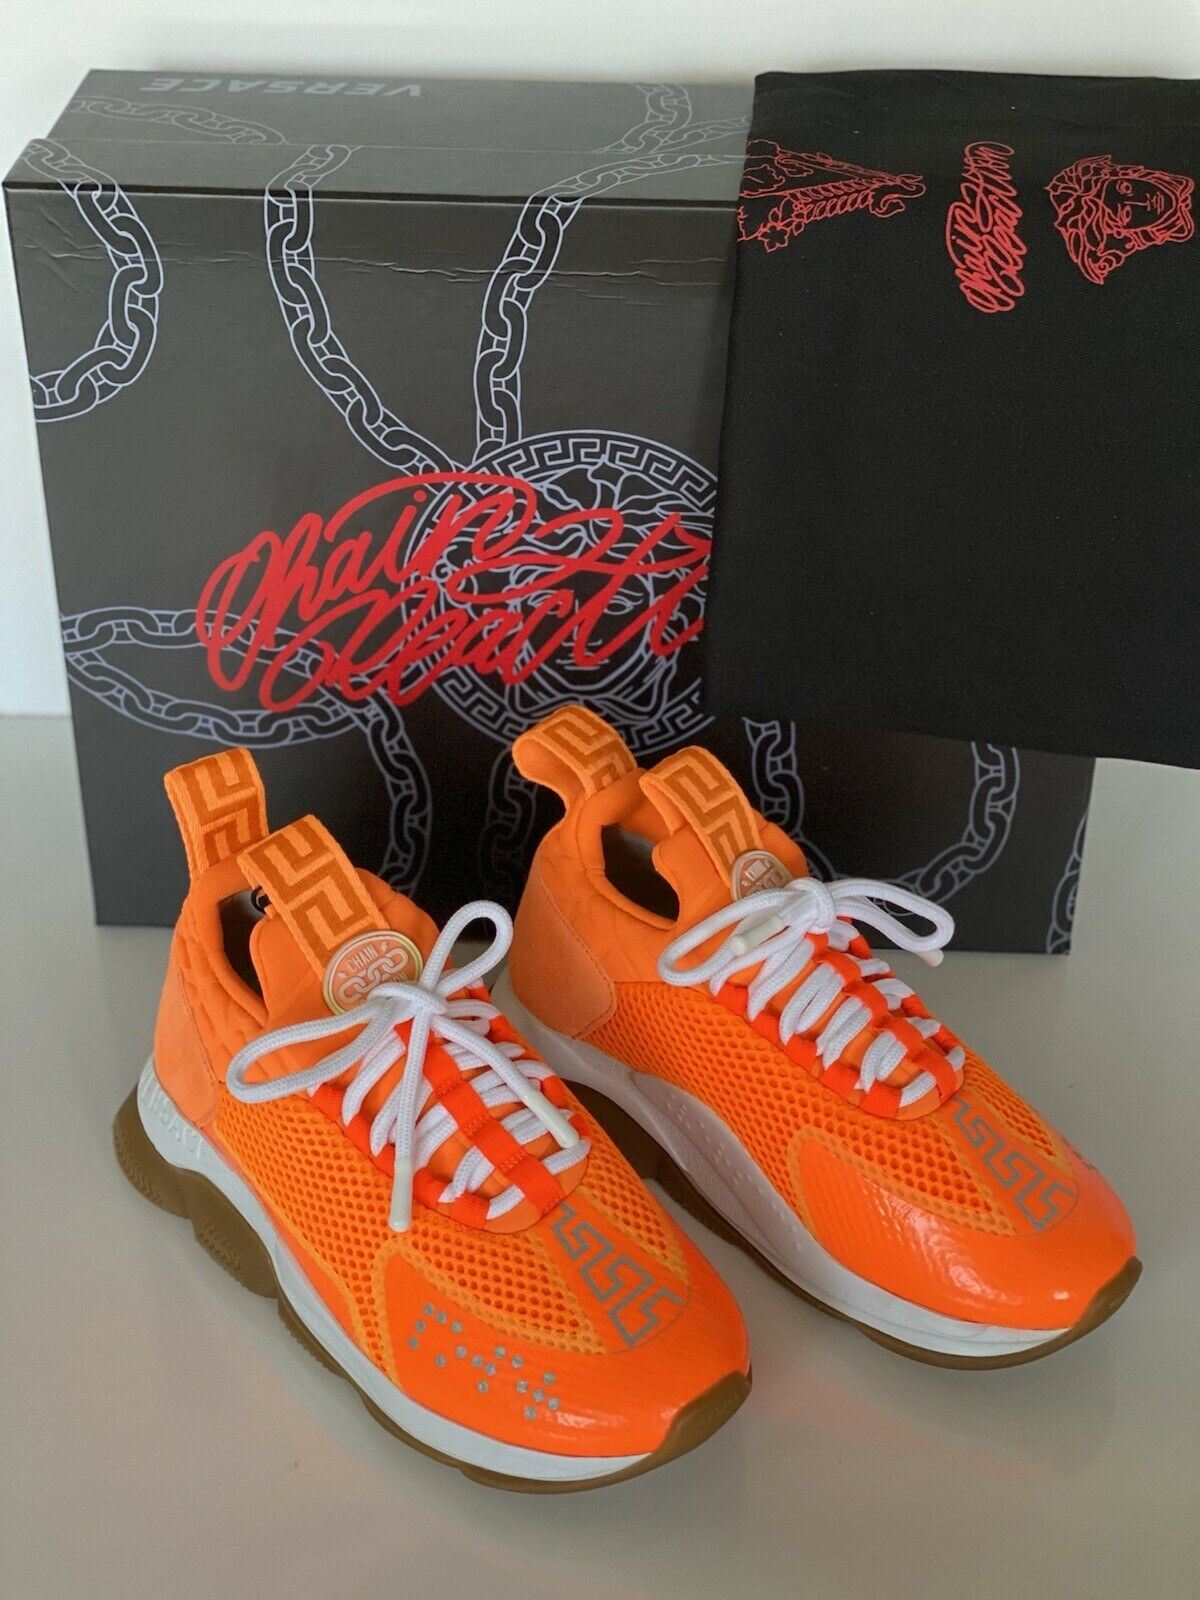 NIB Versace Orange Sparkle Chain Reaction Sneakers 6 US (36 EU) Made in Italy